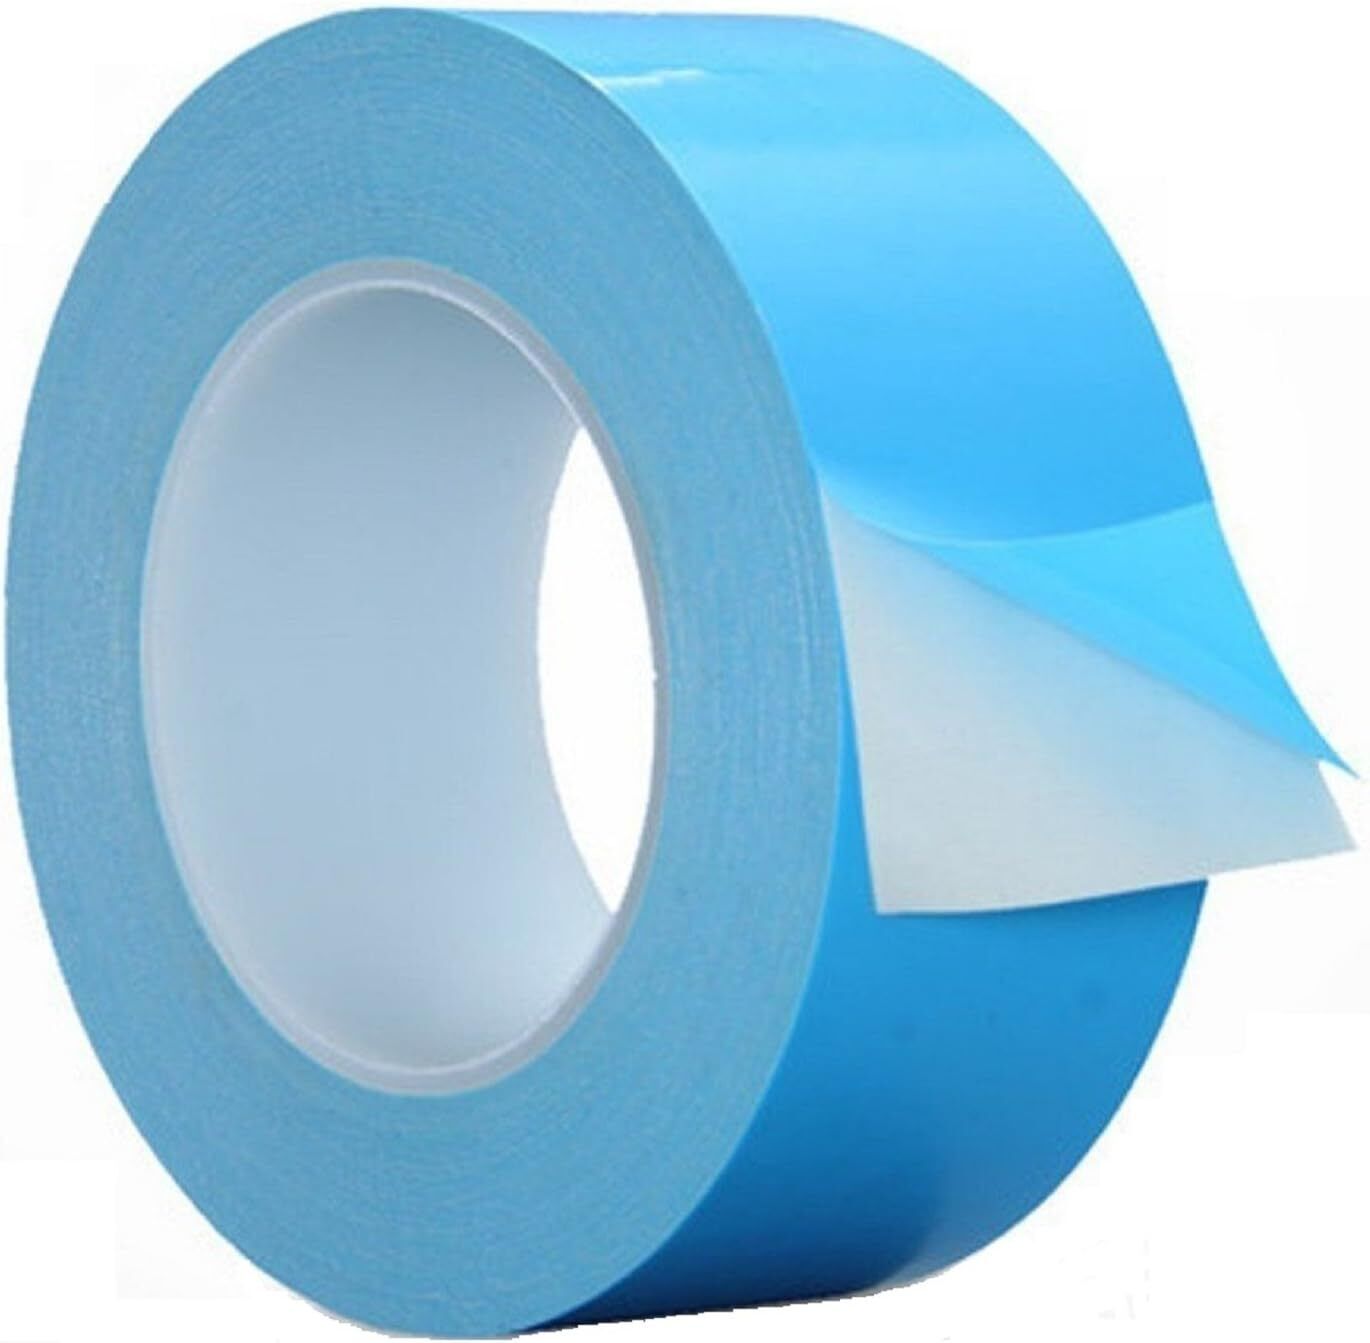 Thermal Adhesive Tape 30mm by 25M, High Performance x Blue 